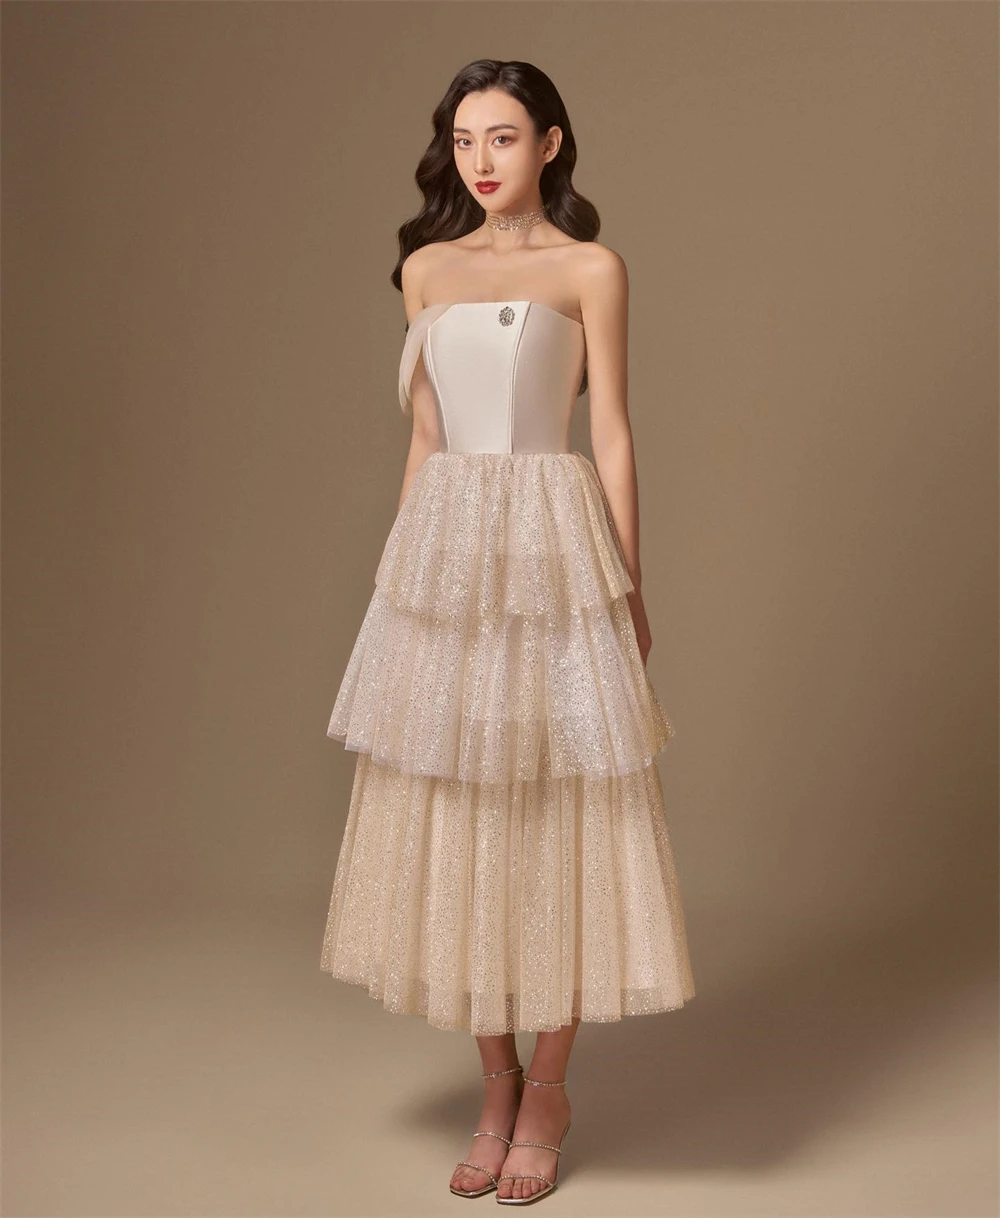 

Prom Dress Yipeisha Simple Modern Style Formal Evening Strapless A-line Appliques Tiered Organza Bespoke Occasion Dresses